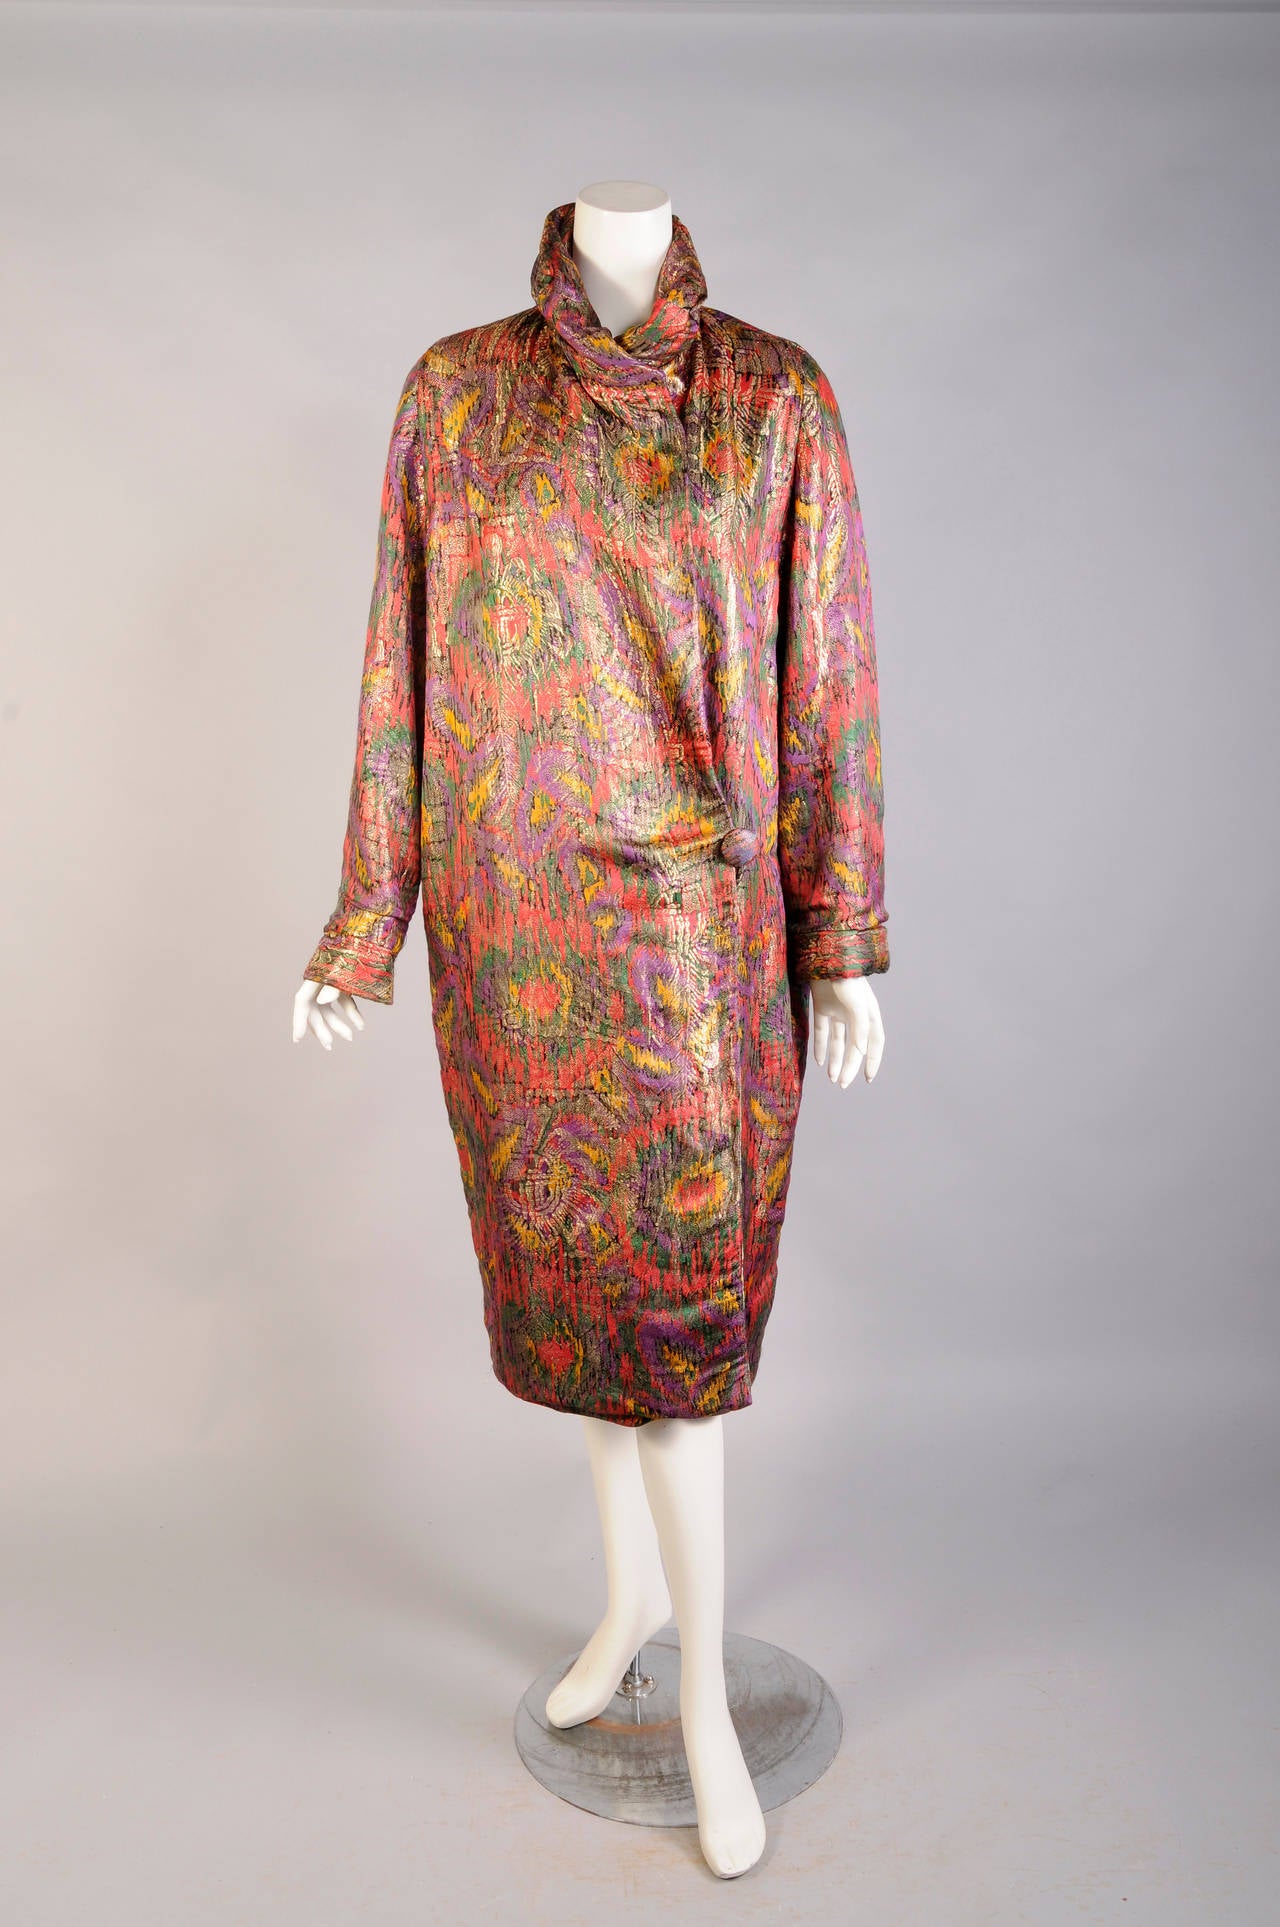 Gold lame is combined with bright and cheerful shades of red, yellow, green and purple with accents of black for this stunning 1920's evening coat. It is fully lined in green silk velvet and it is in excellent condition.
Measurements;
Shoulders 15